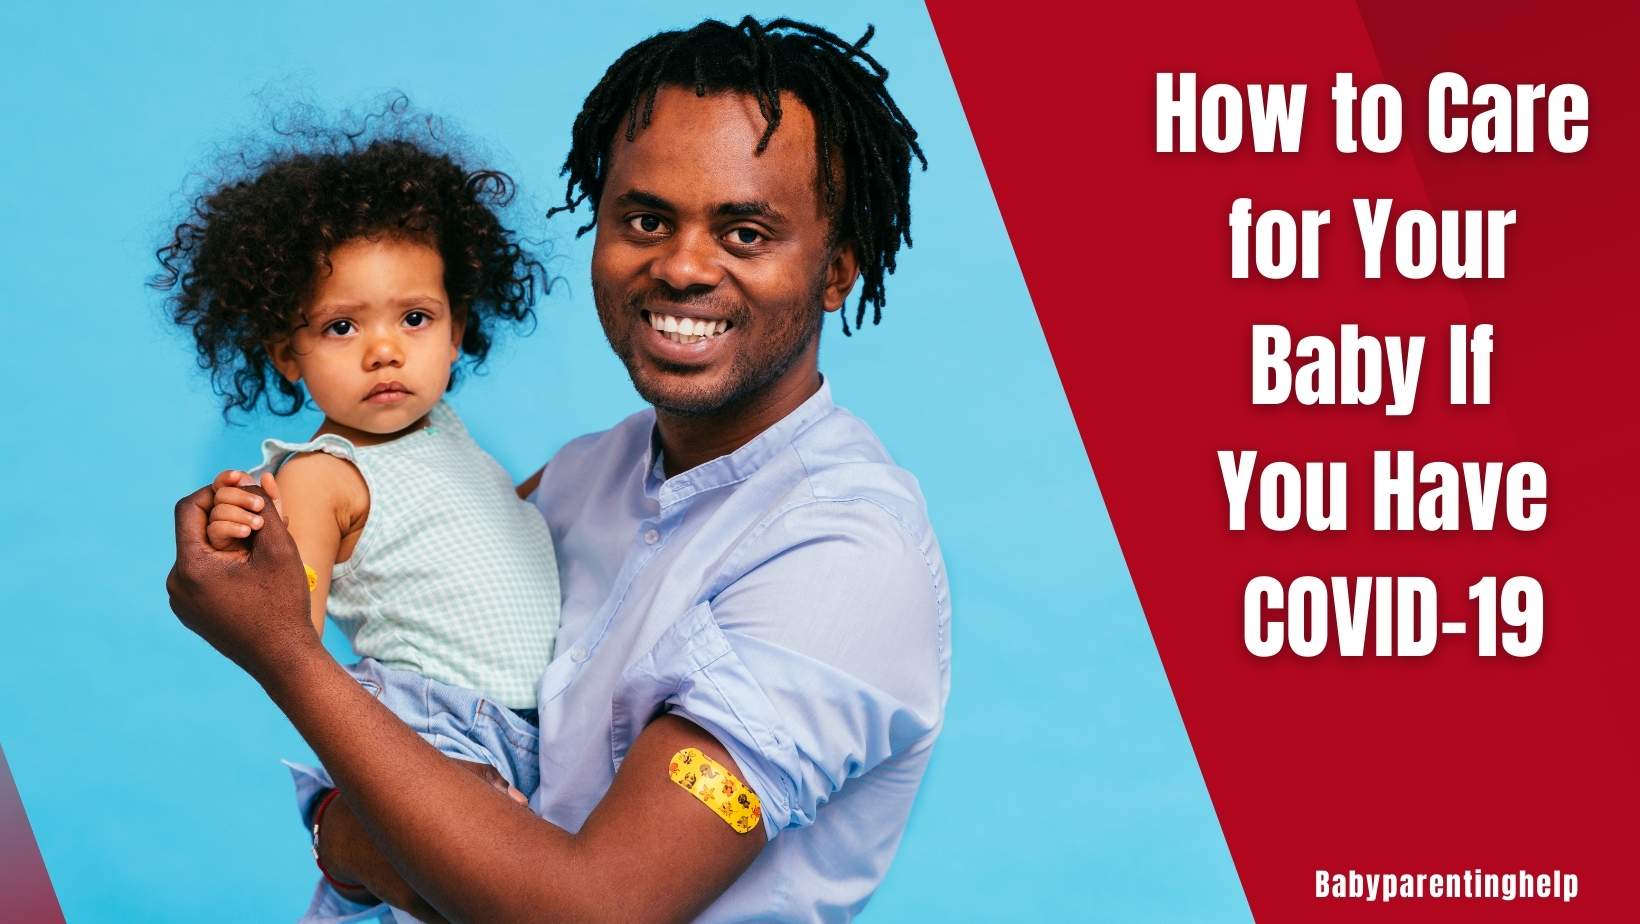 How to Care for Your Baby If You Have COVID-19